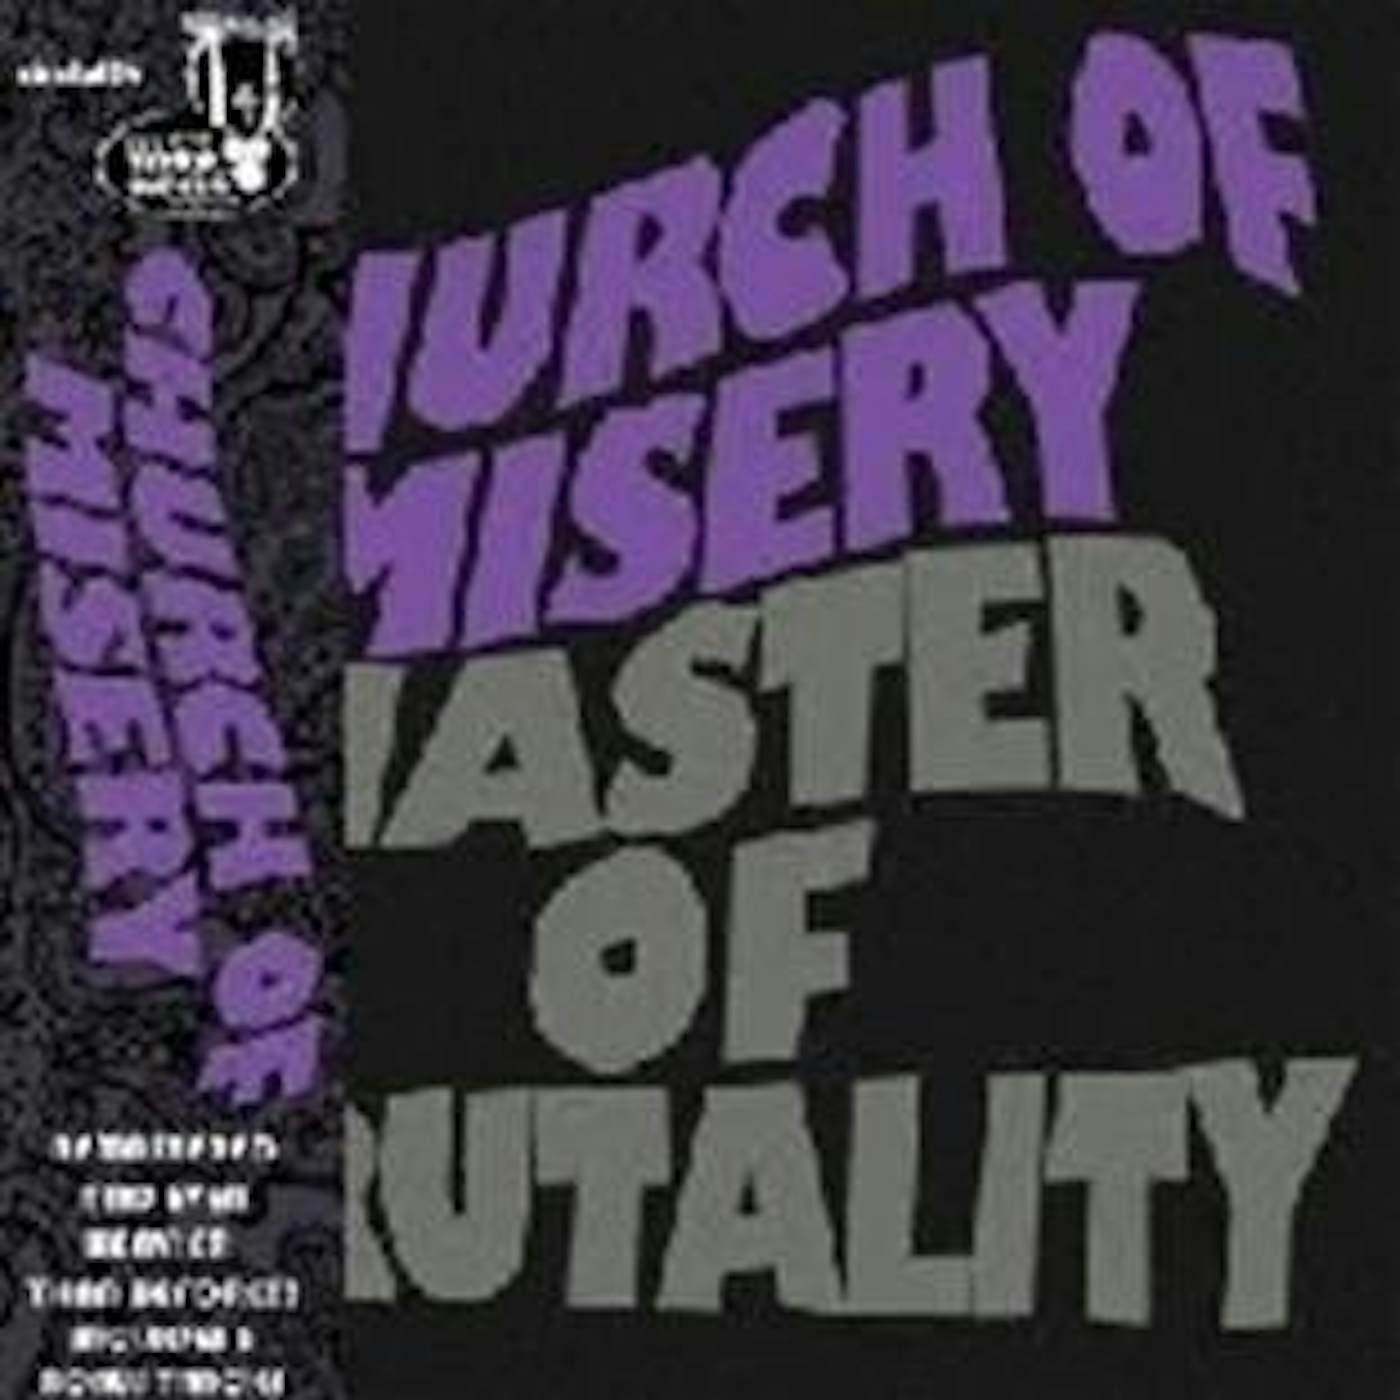 Church Of Misery Master of Brutality Vinyl Record